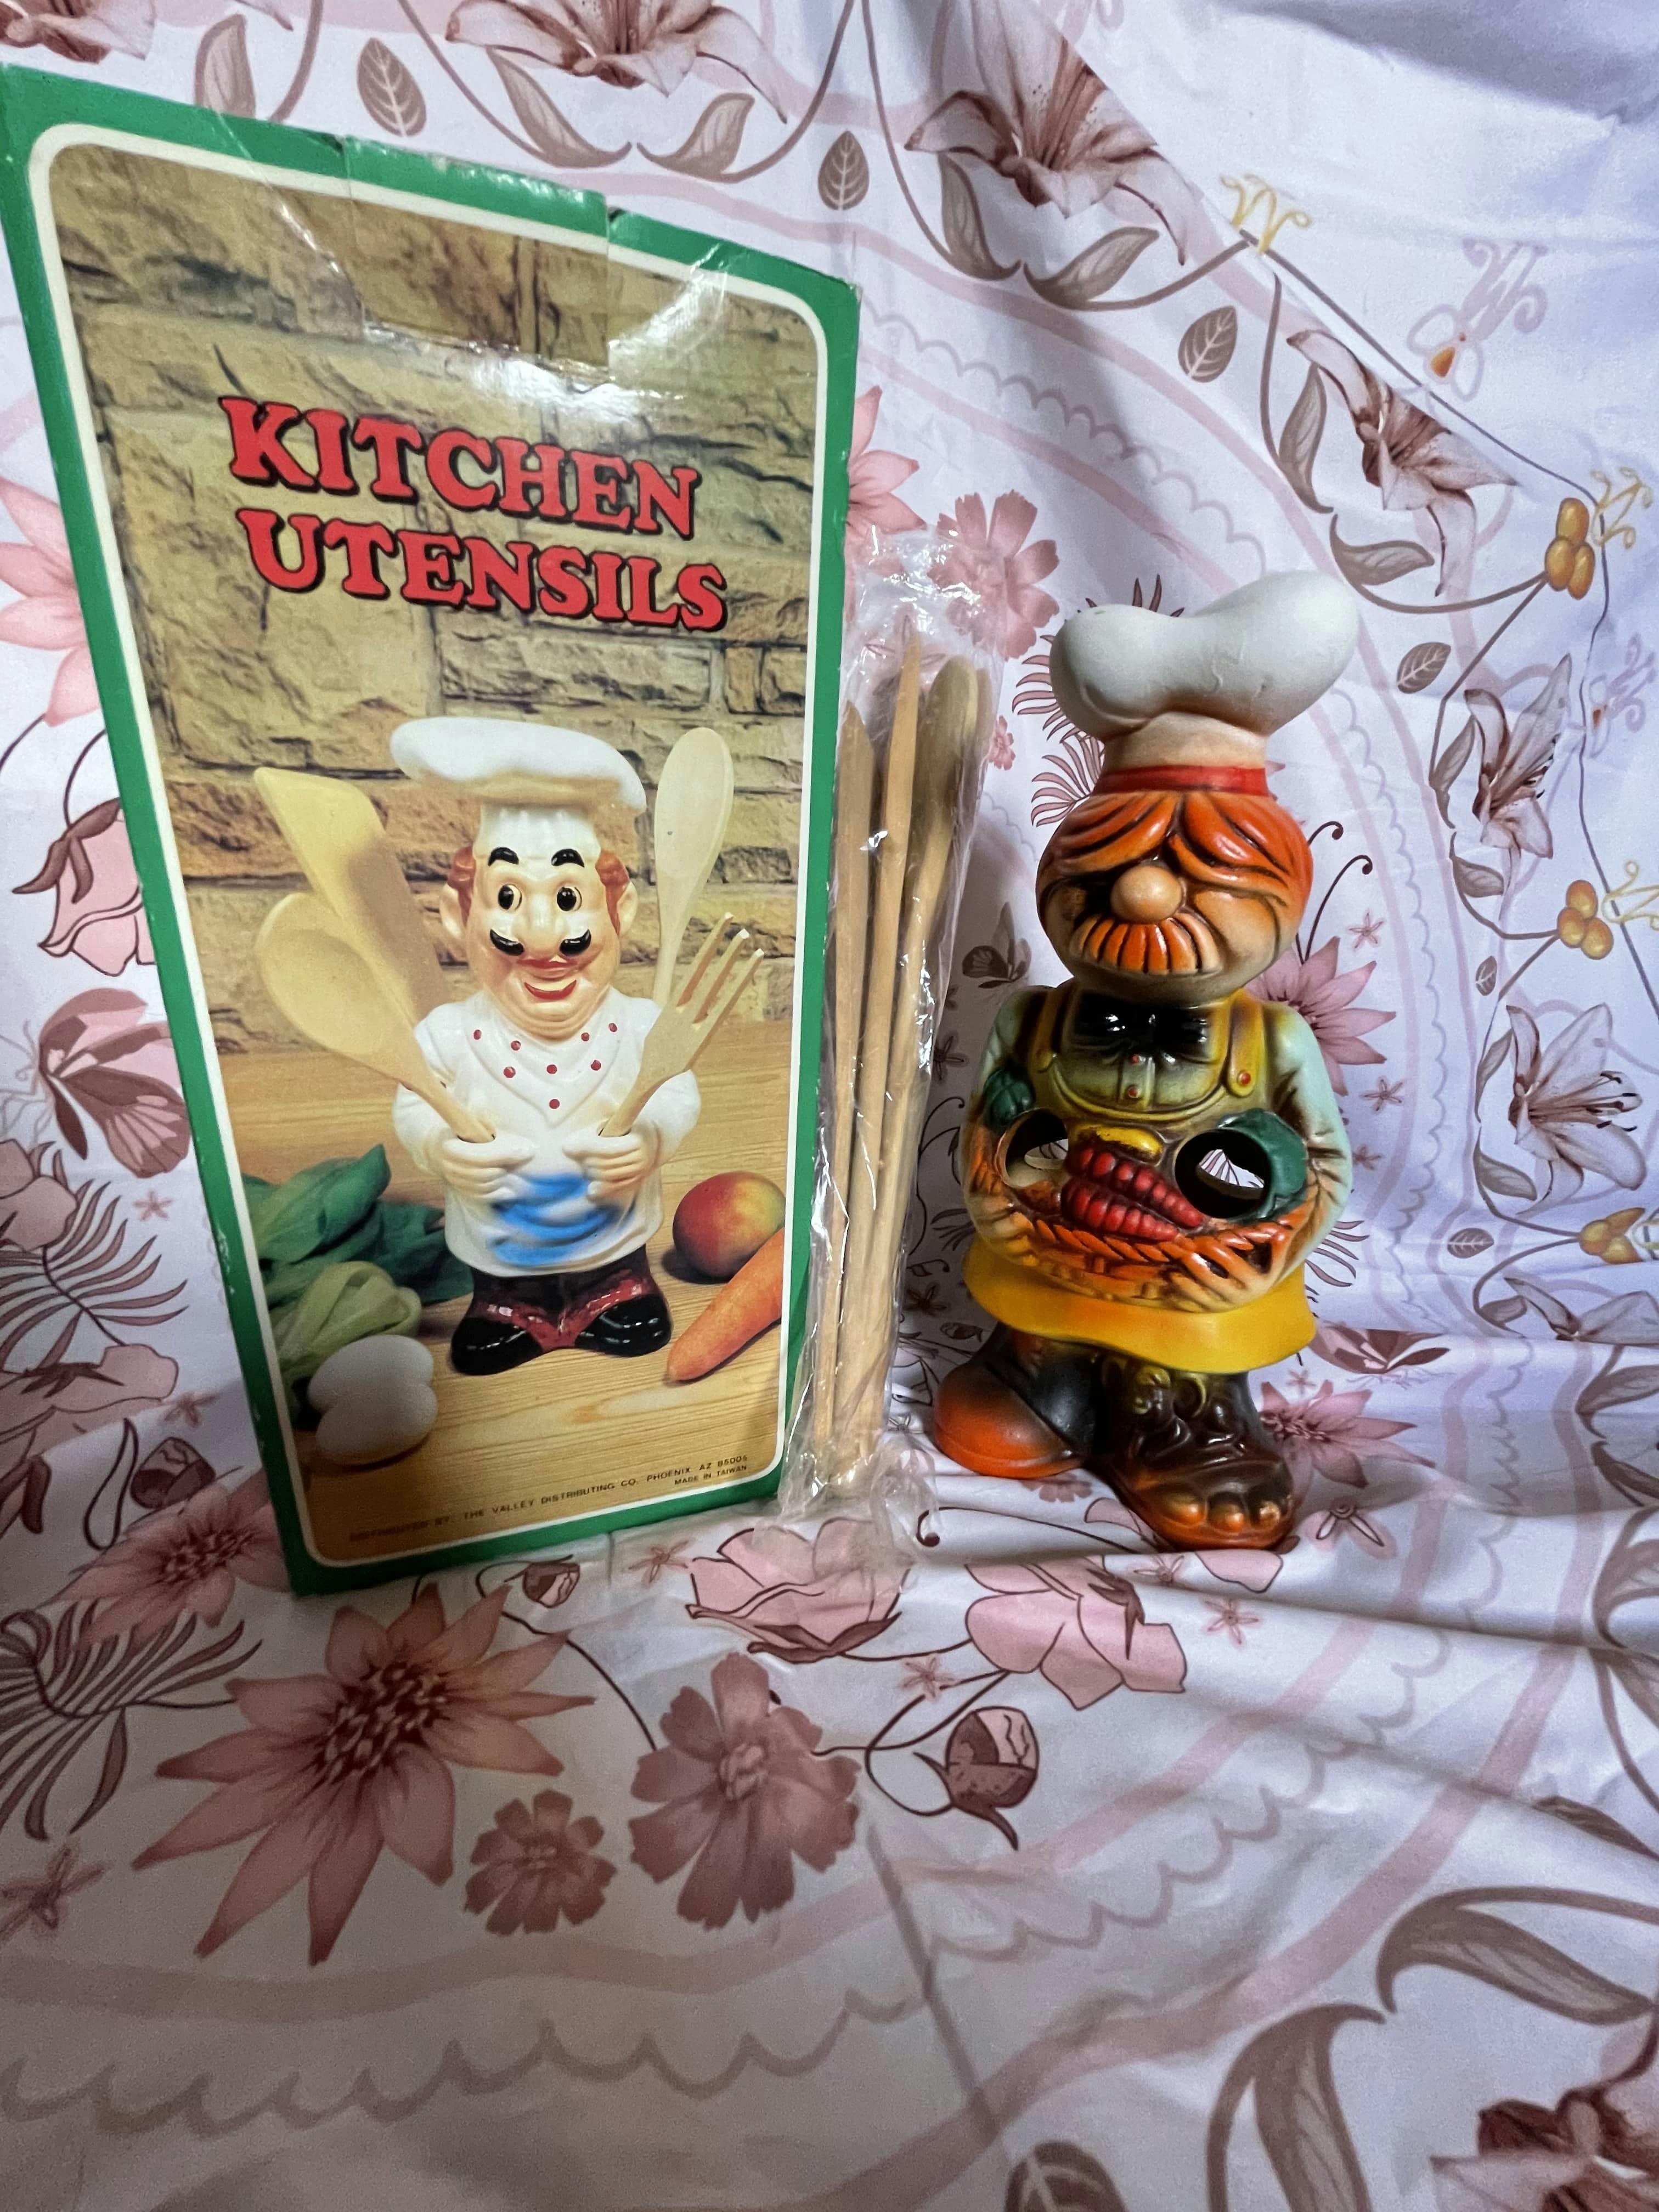 Vintage French Funny "Swedish" Chef Utensil Holder with utensils in plastic bag next to green card reading "KITCHEN UTENSILS"